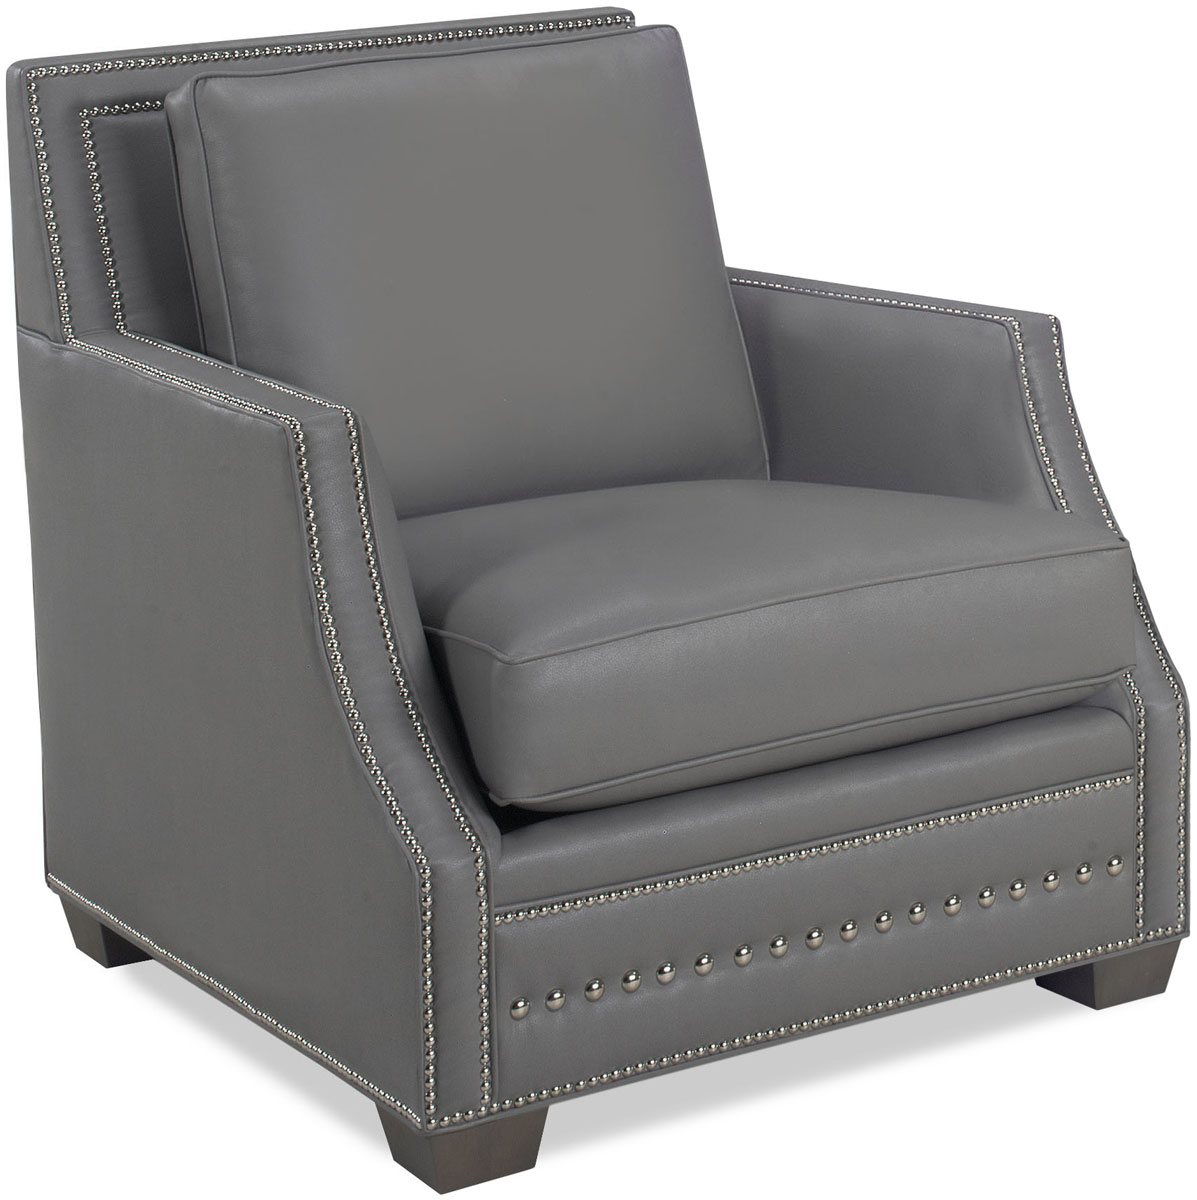 Temple Furniture 24395 Patterson Chair 